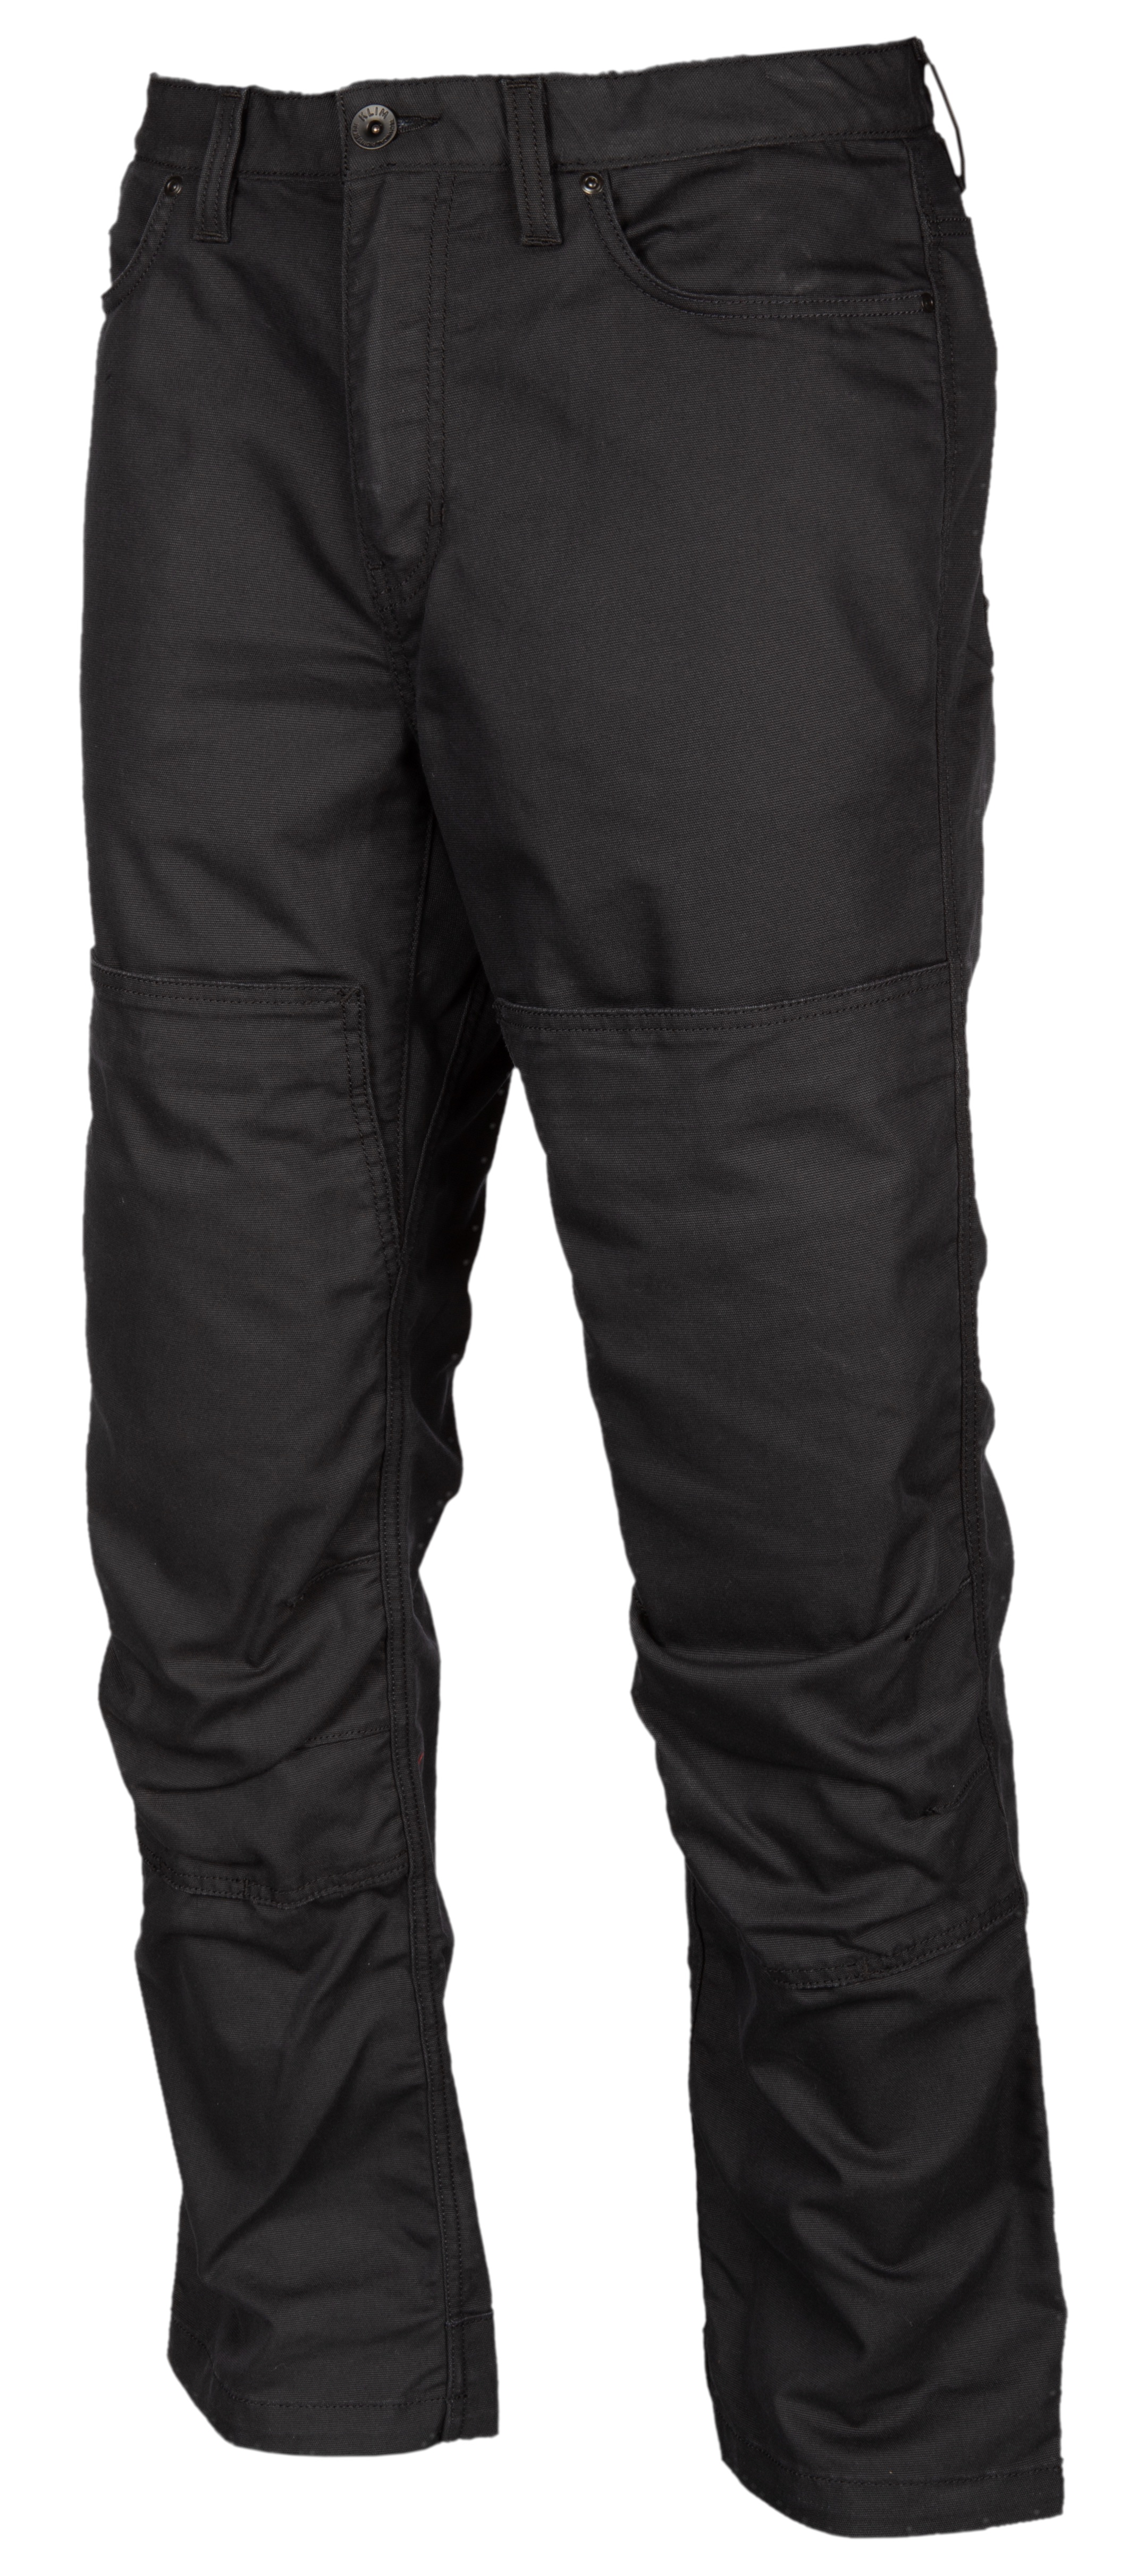 Viewing Images For Klim 2022 Outrider Pant :: MotorcycleGear.com